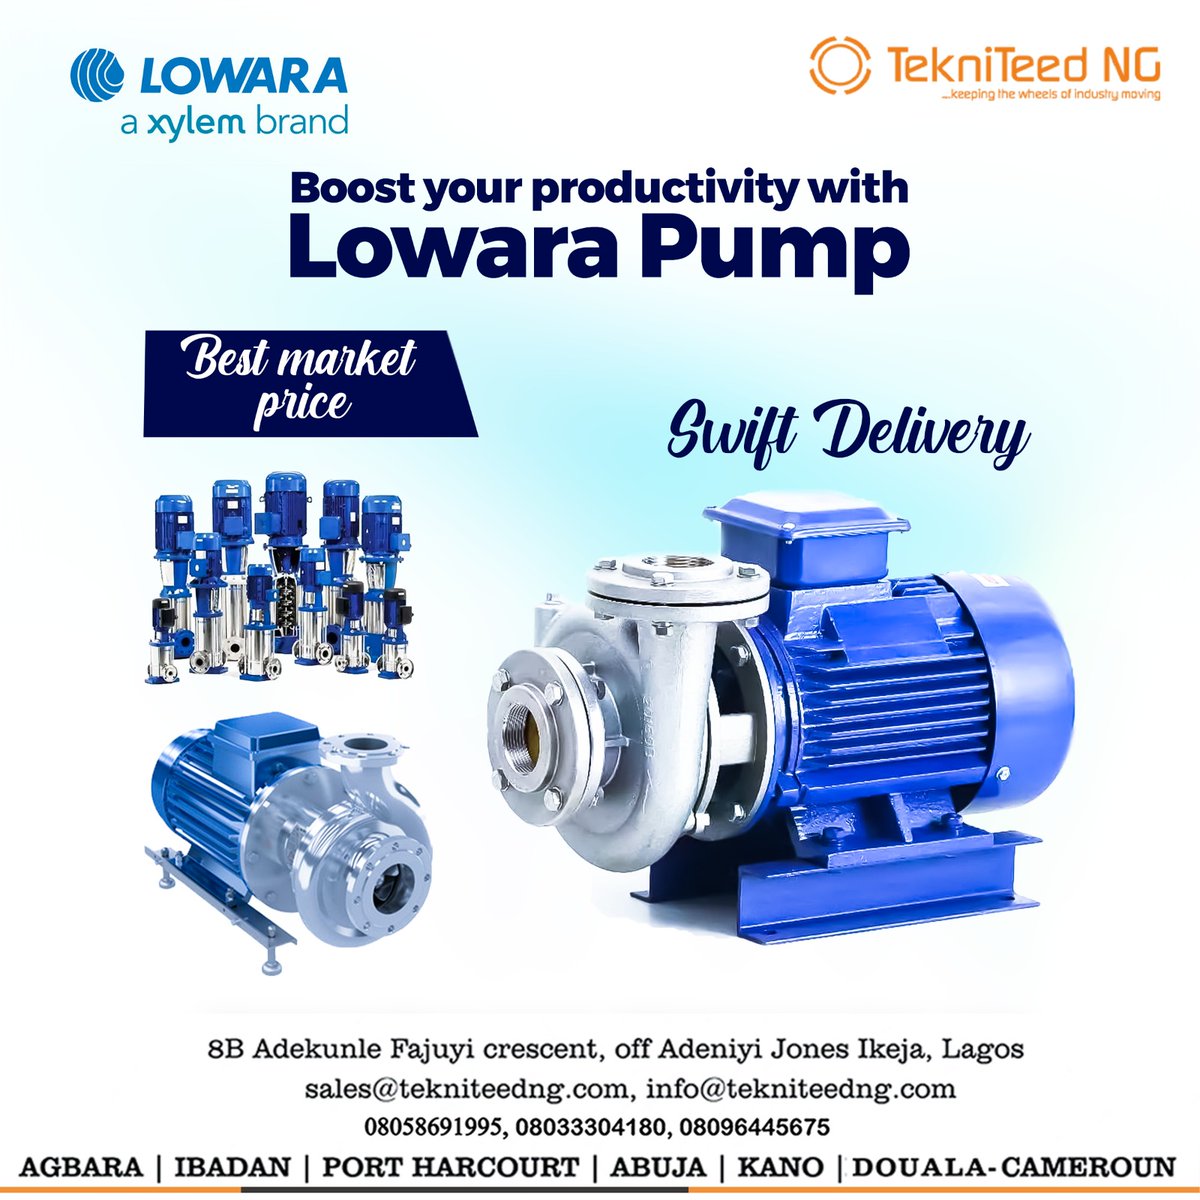 Upgrade to @Lowara pump today and watch your productivity soar!

Contact us today:
+234-8058691995, 08033304180, 08096445675
Email: sales@tekniteedng.com, info@tekniteedng.com
#LowaraPump #WaterPump #IndustrialPumps #EfficientPumps #WaterManagement #WaterInfrastructure